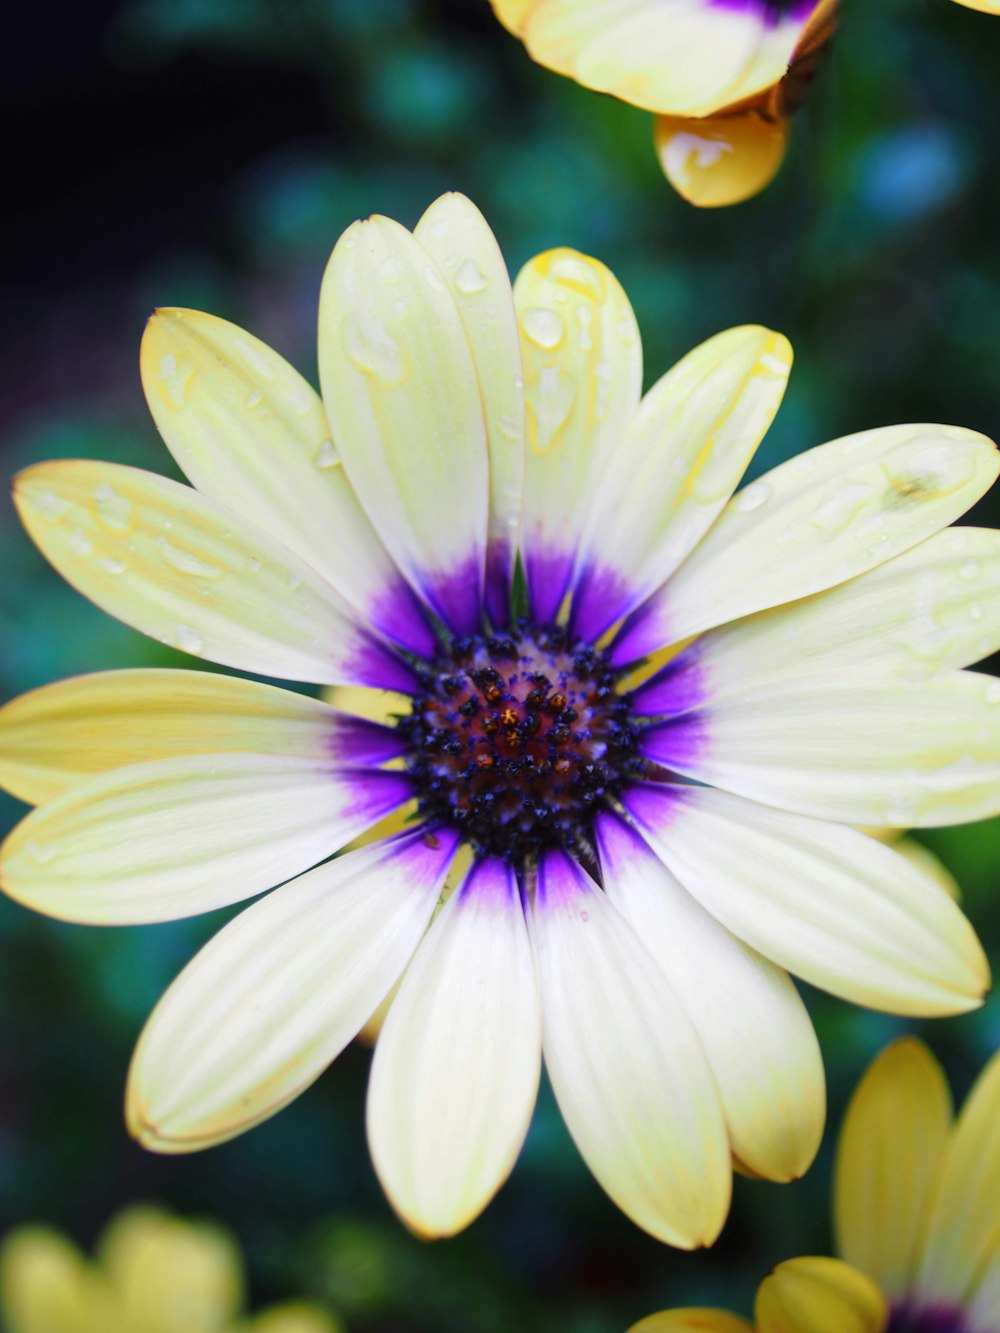 water drops on yellow and purple daisy flower